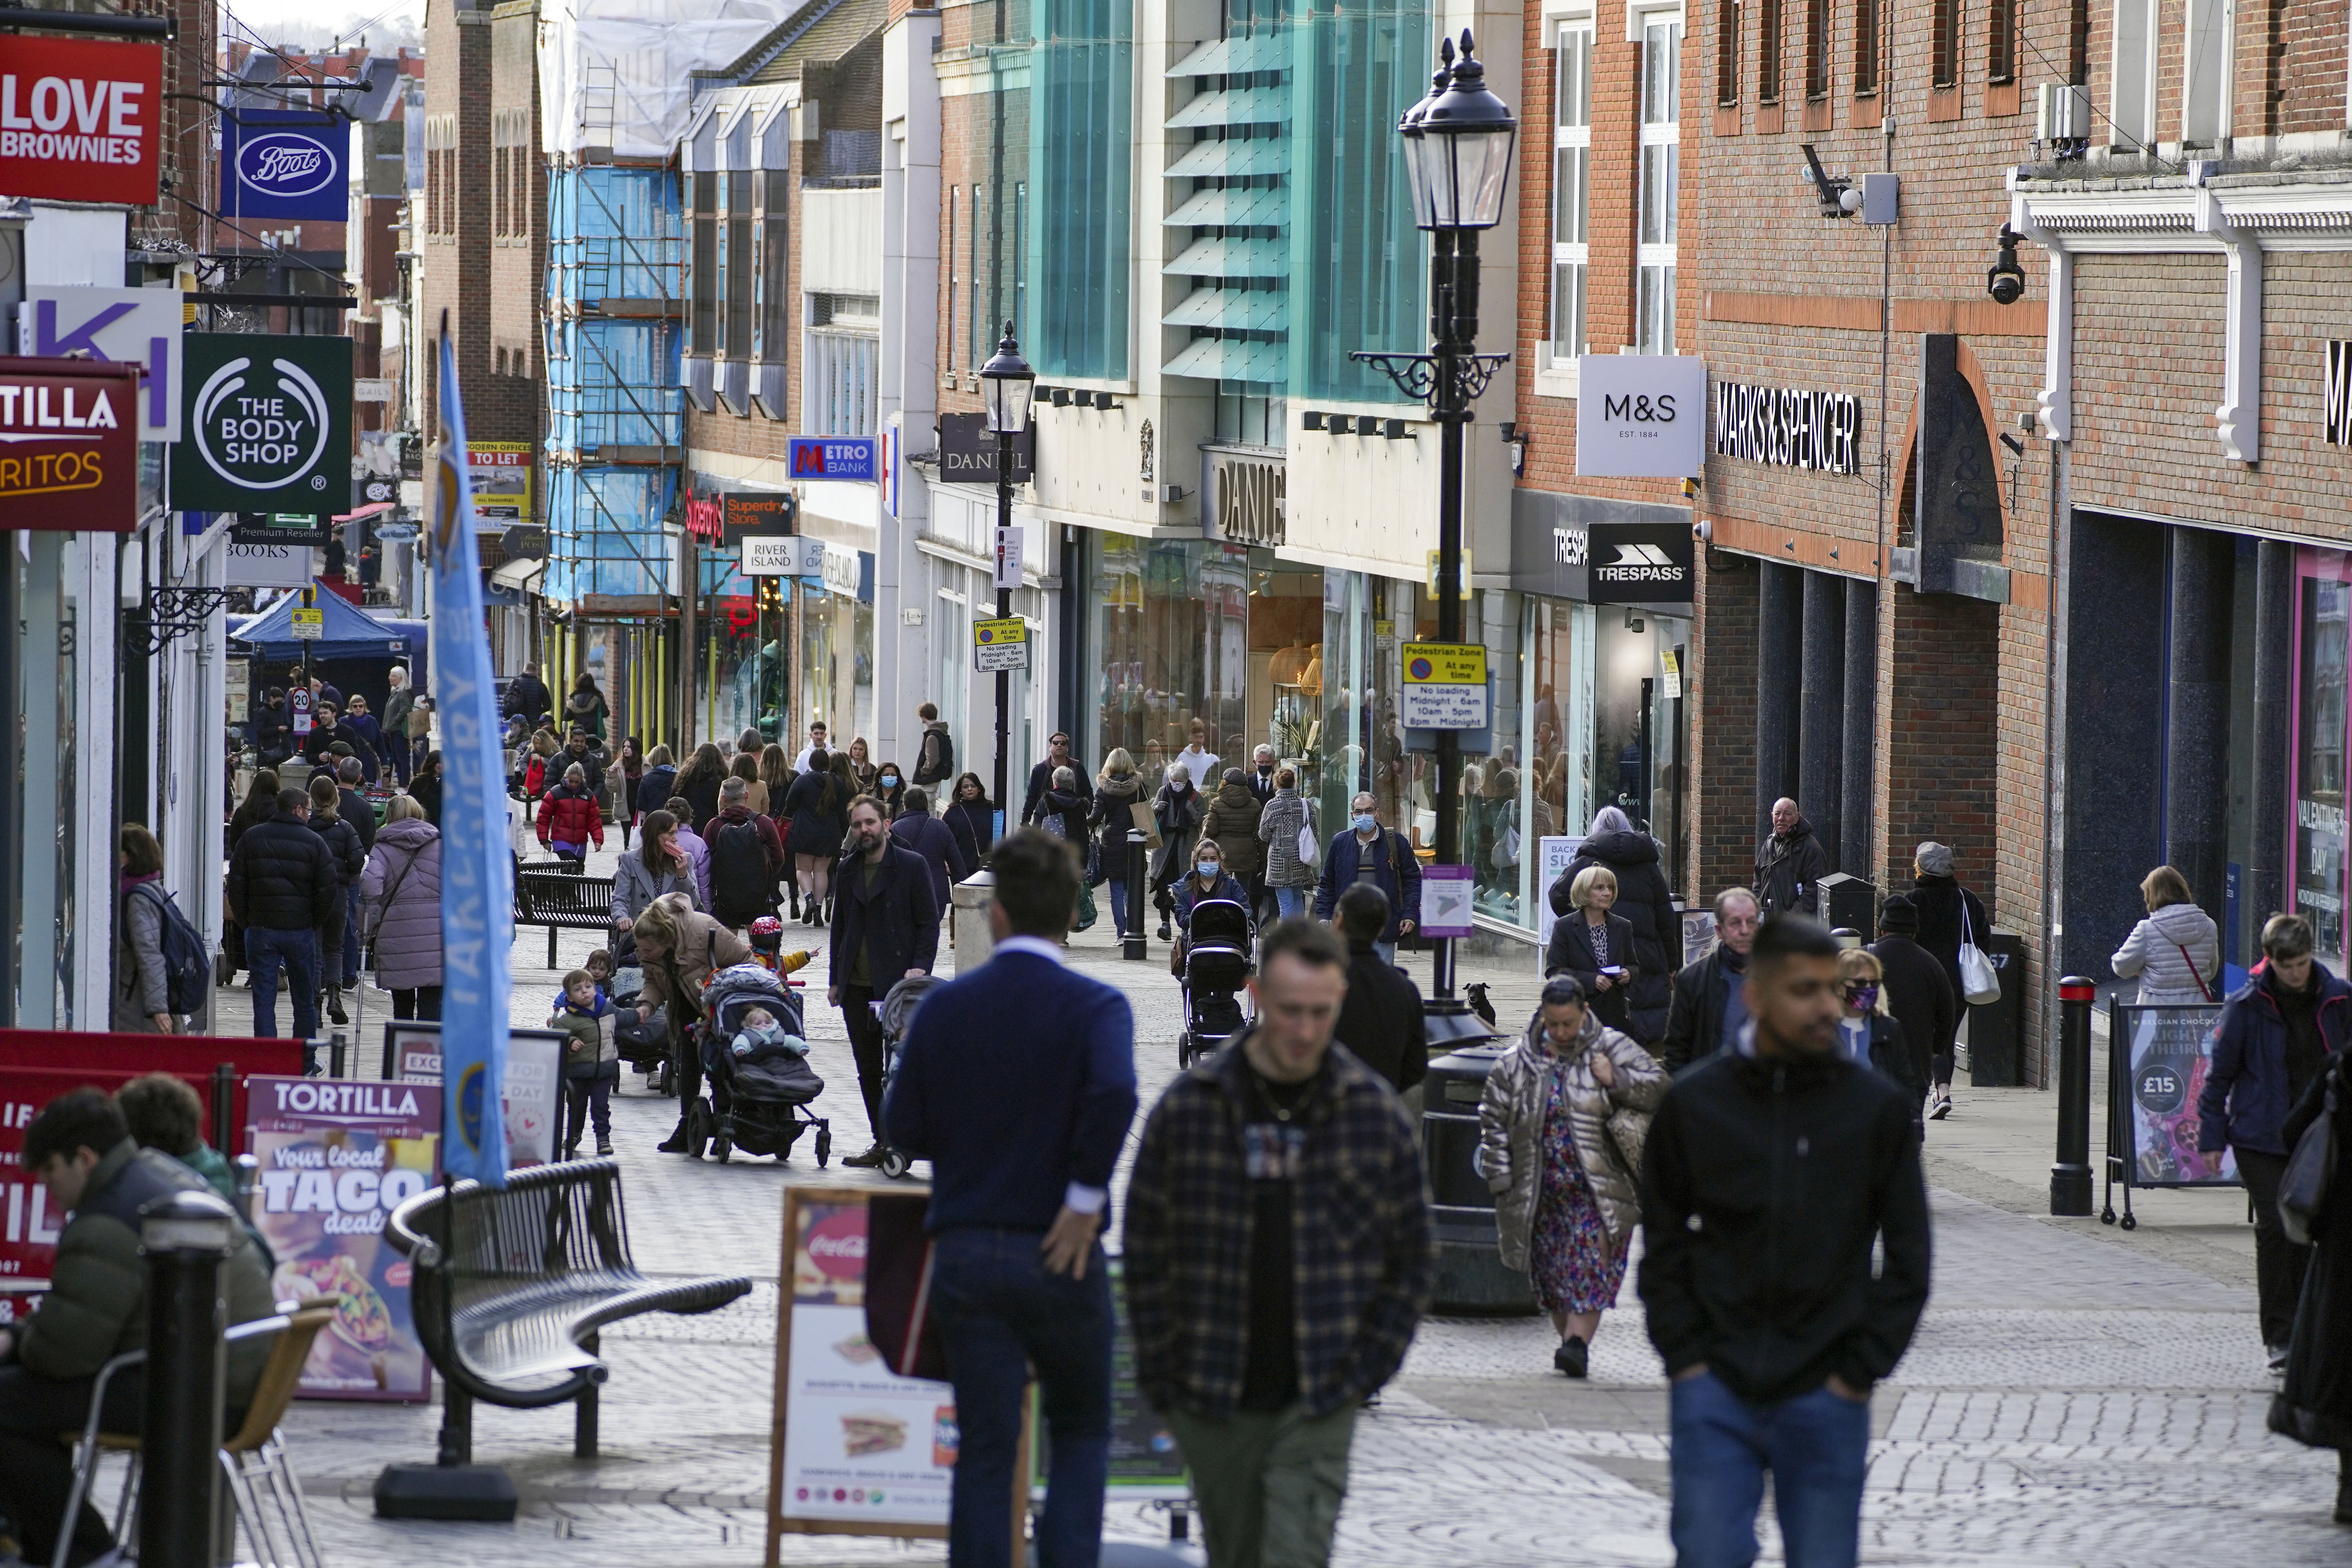 Shoppers returned to the high street in February despite prices continuing to rise at a rapid pace, according to a CBI survey (Steve Parsons/PA)